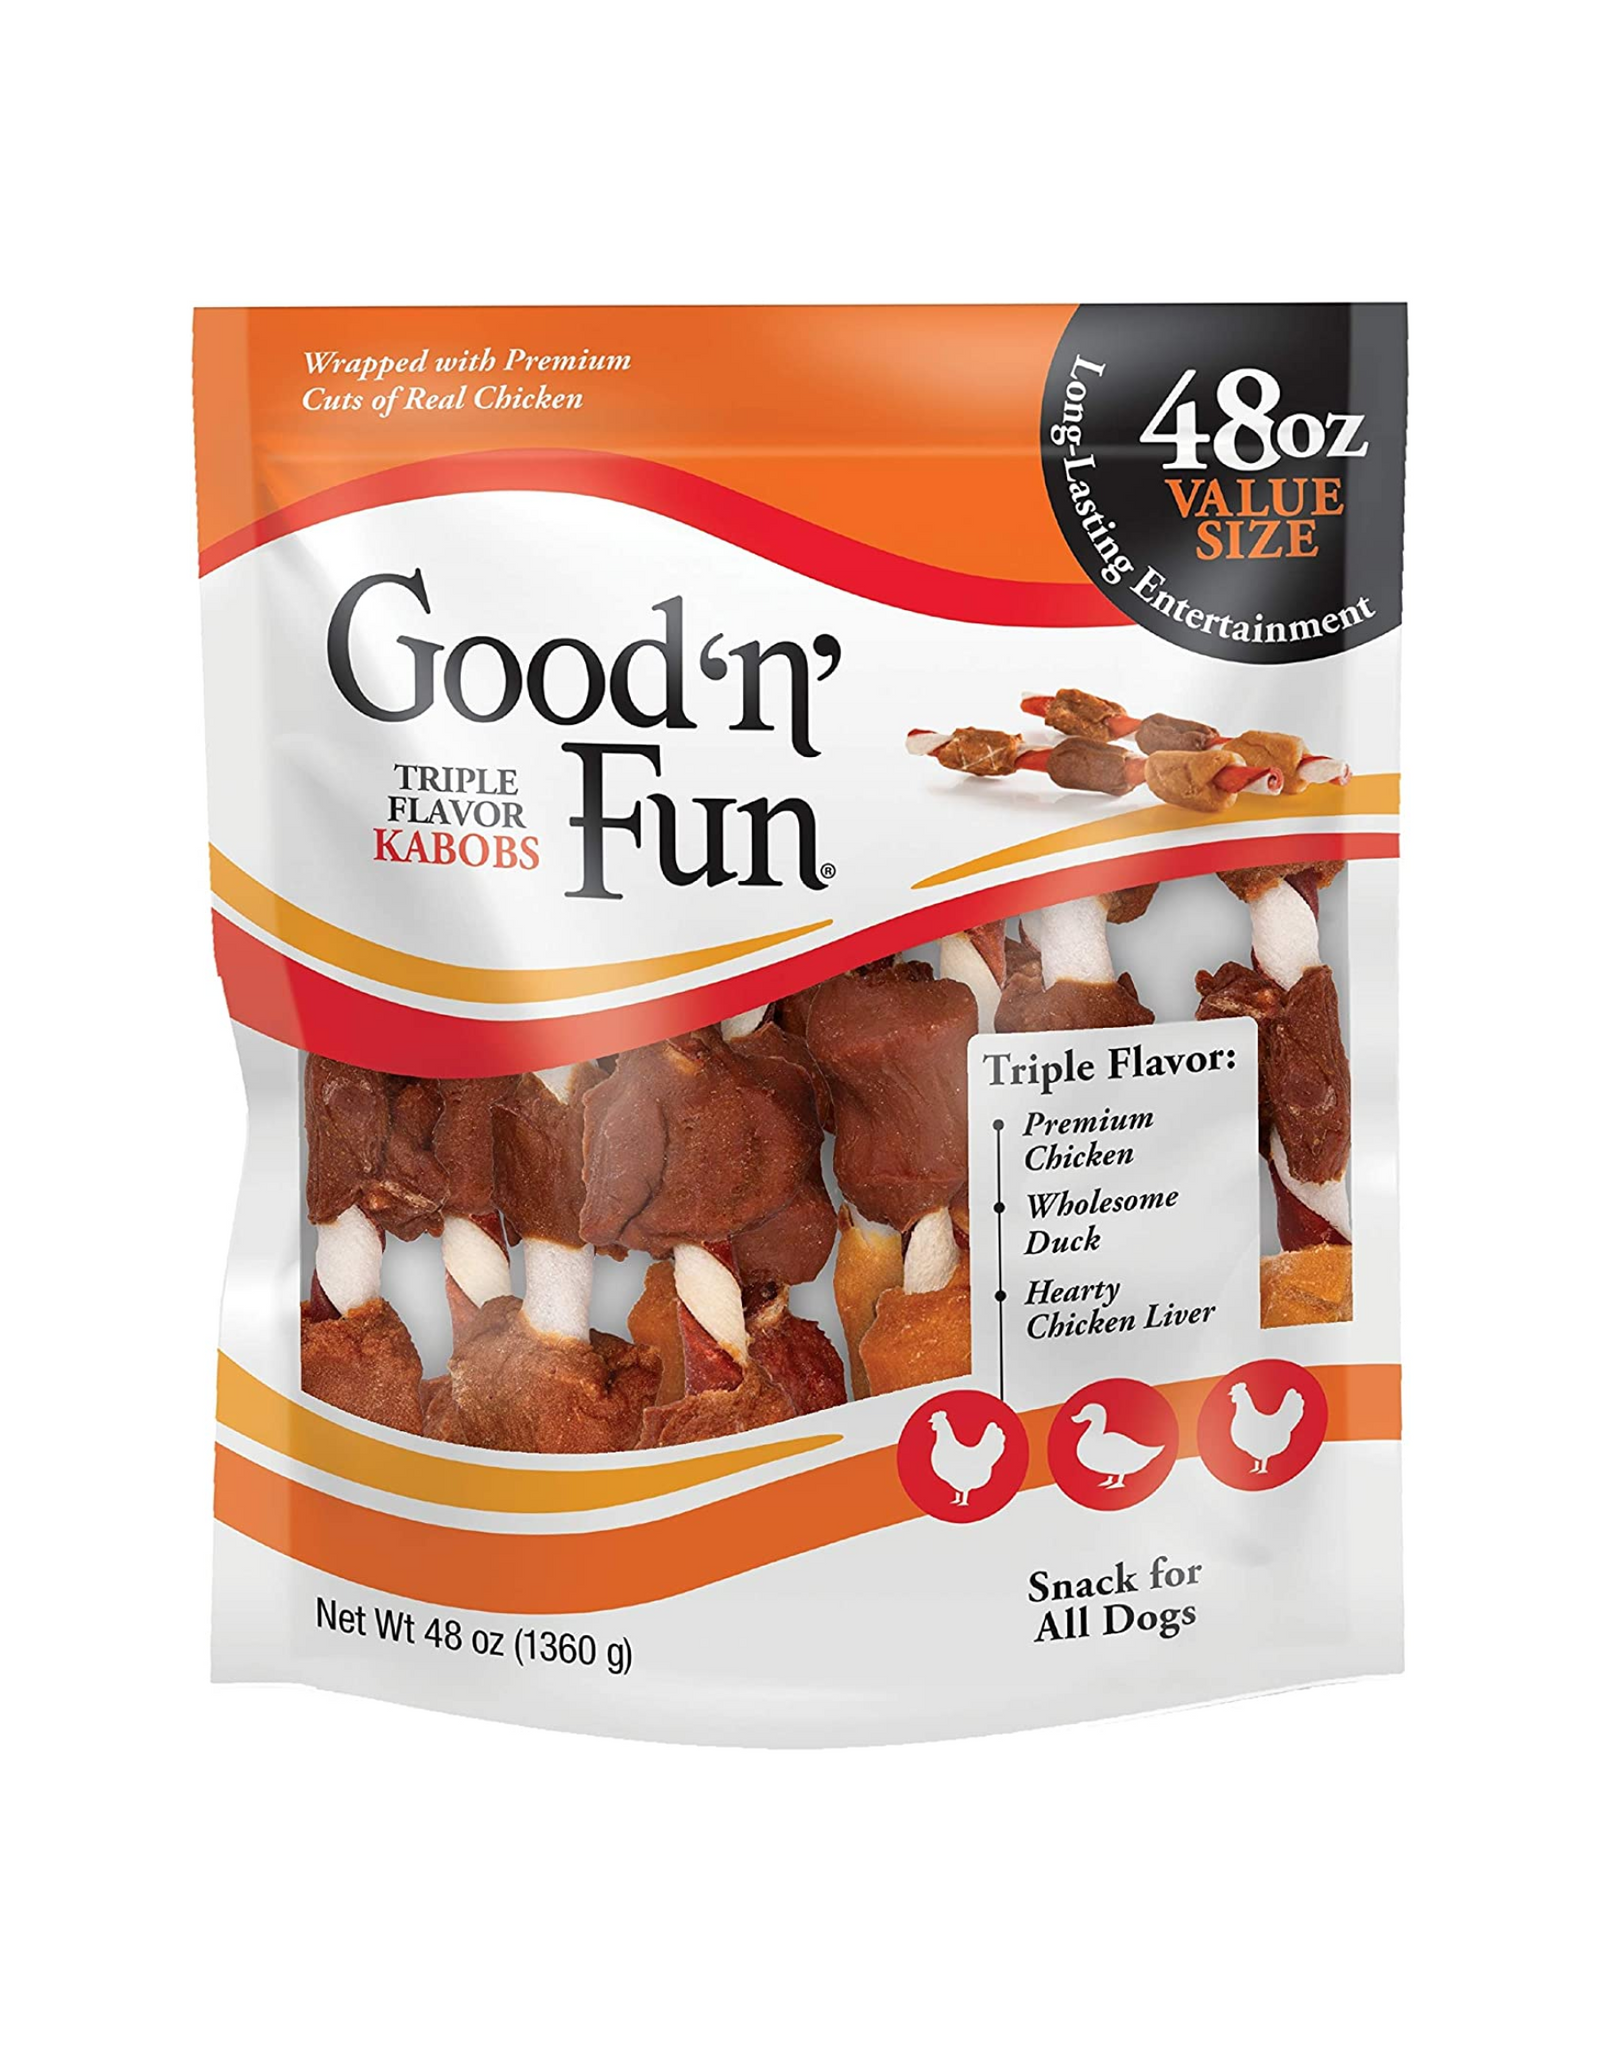 Good'n'Fun Triple Flavor Kabobs 48 Ounce, Rawhide Snack For All Dogs, 48 oz